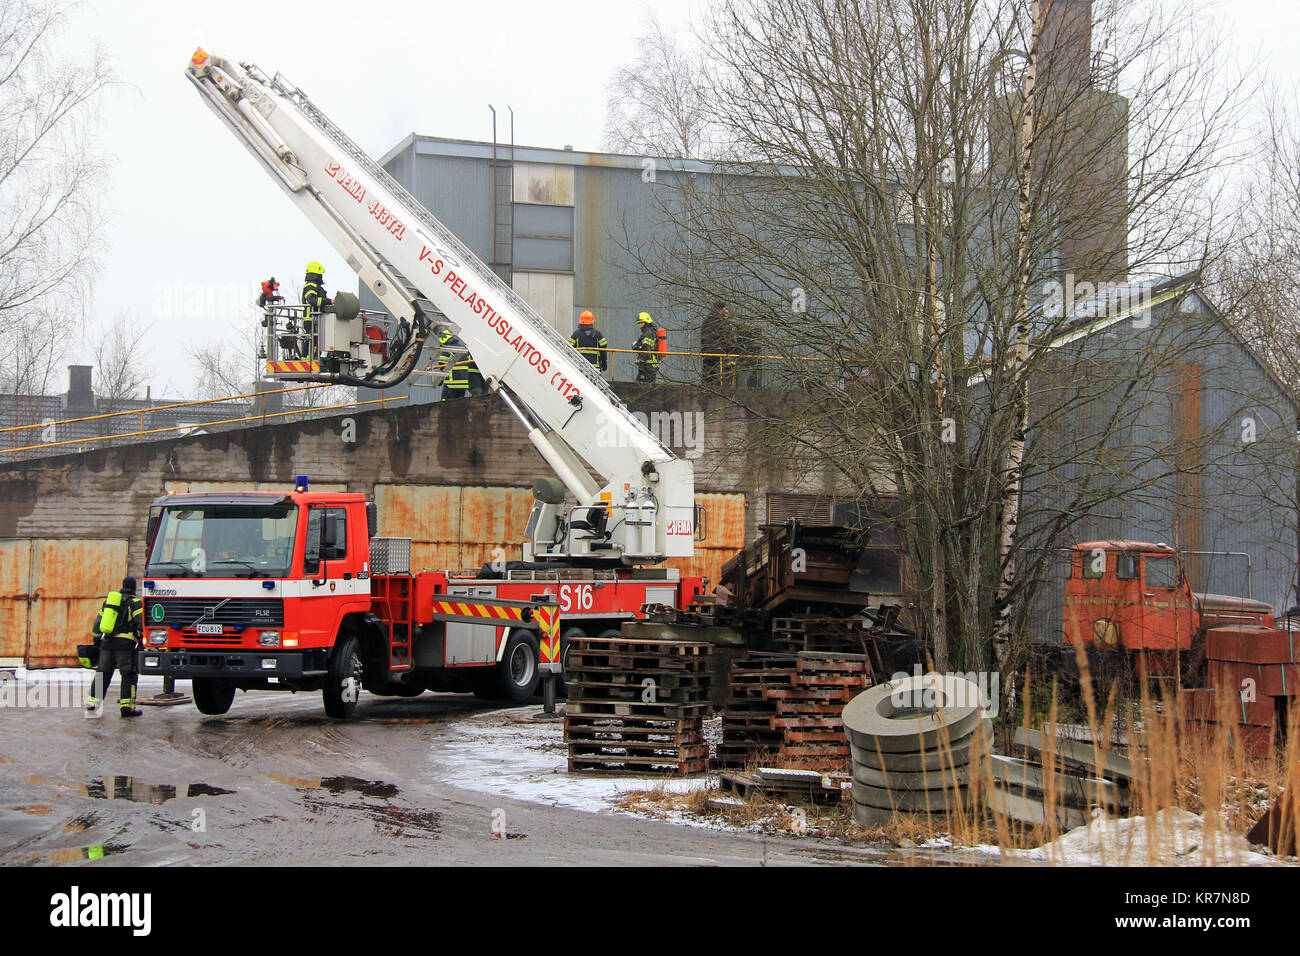 SALO, FINLAND - FEBRUARY 16, 2013: Firefightes extinguish the first Salo Cement Plant fire, but the second fire on the same day destroys the old facto Stock Photo